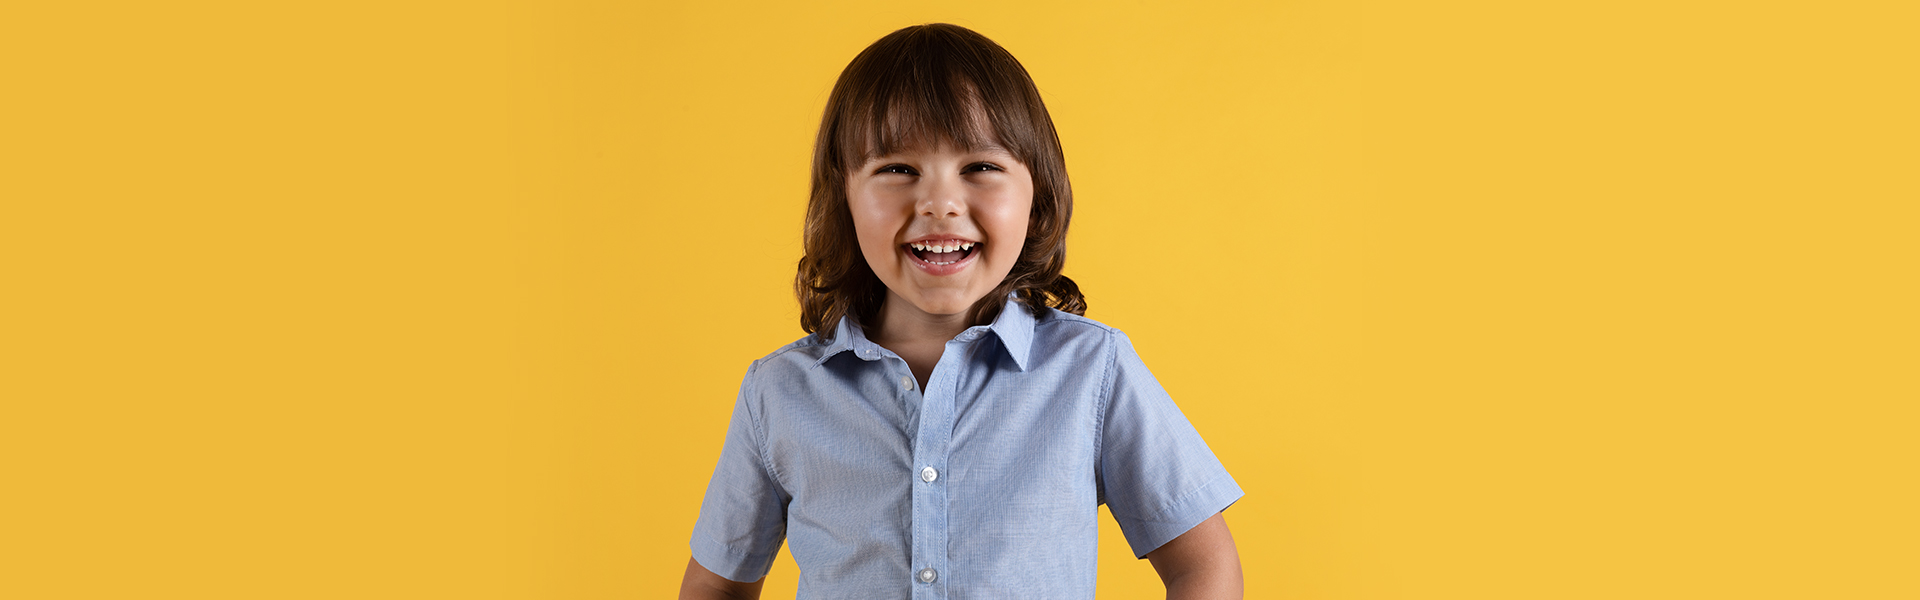 When Should You Make Your Child's First Dentist Appointment?